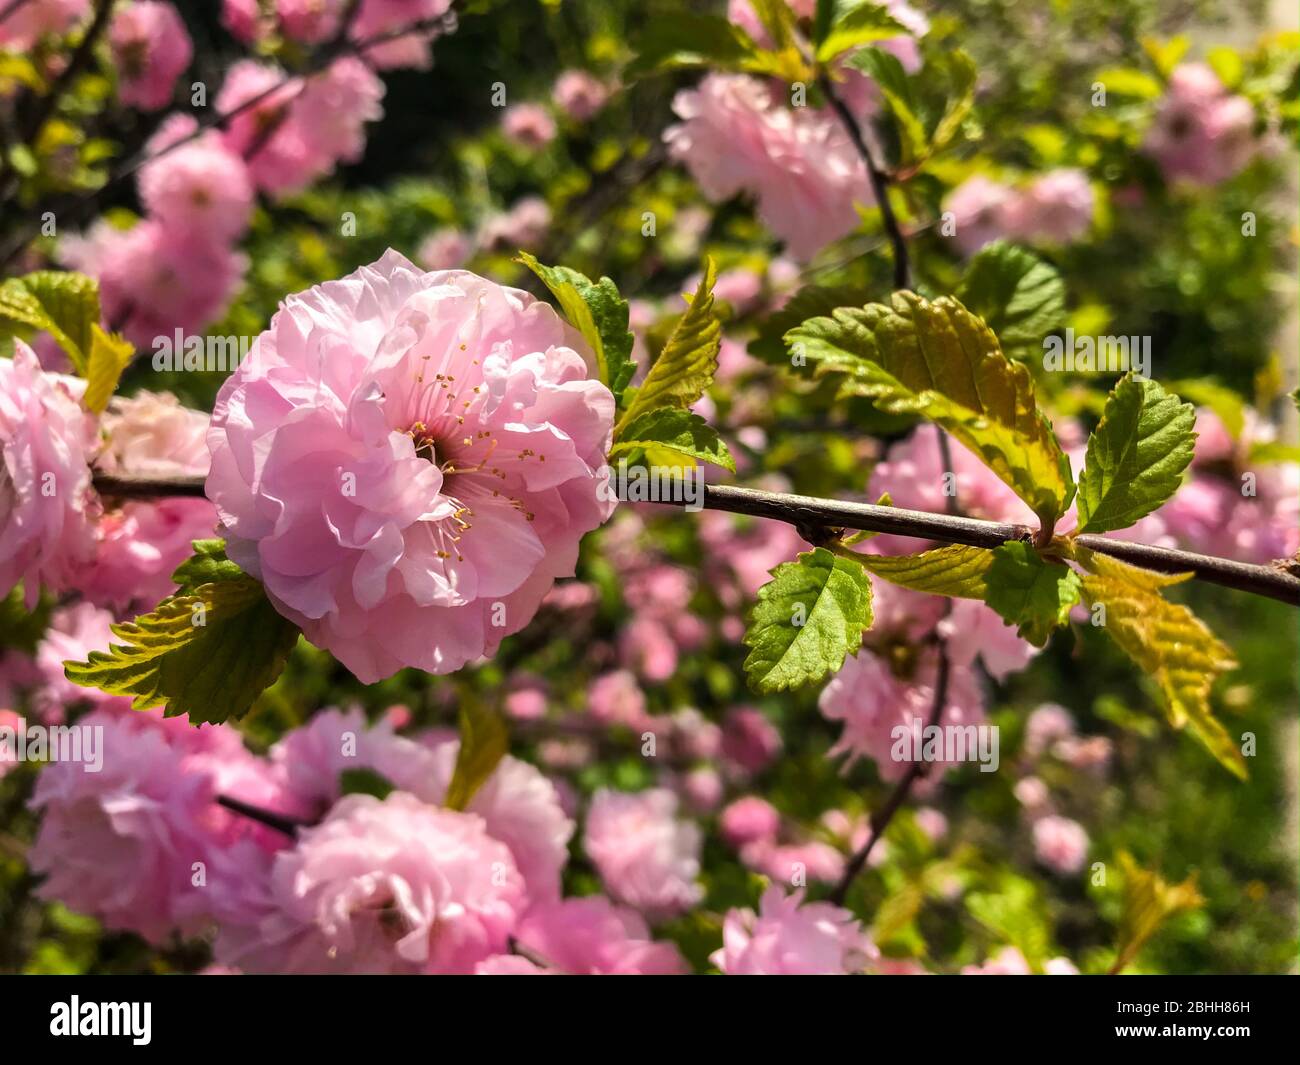 Prunus Triloba (Flowering Plum, Flowering Almond, Louiseania). Branch With Pink Flower. Spring Rose Cherry Blossom With Young Green Leaves. Stock Photo